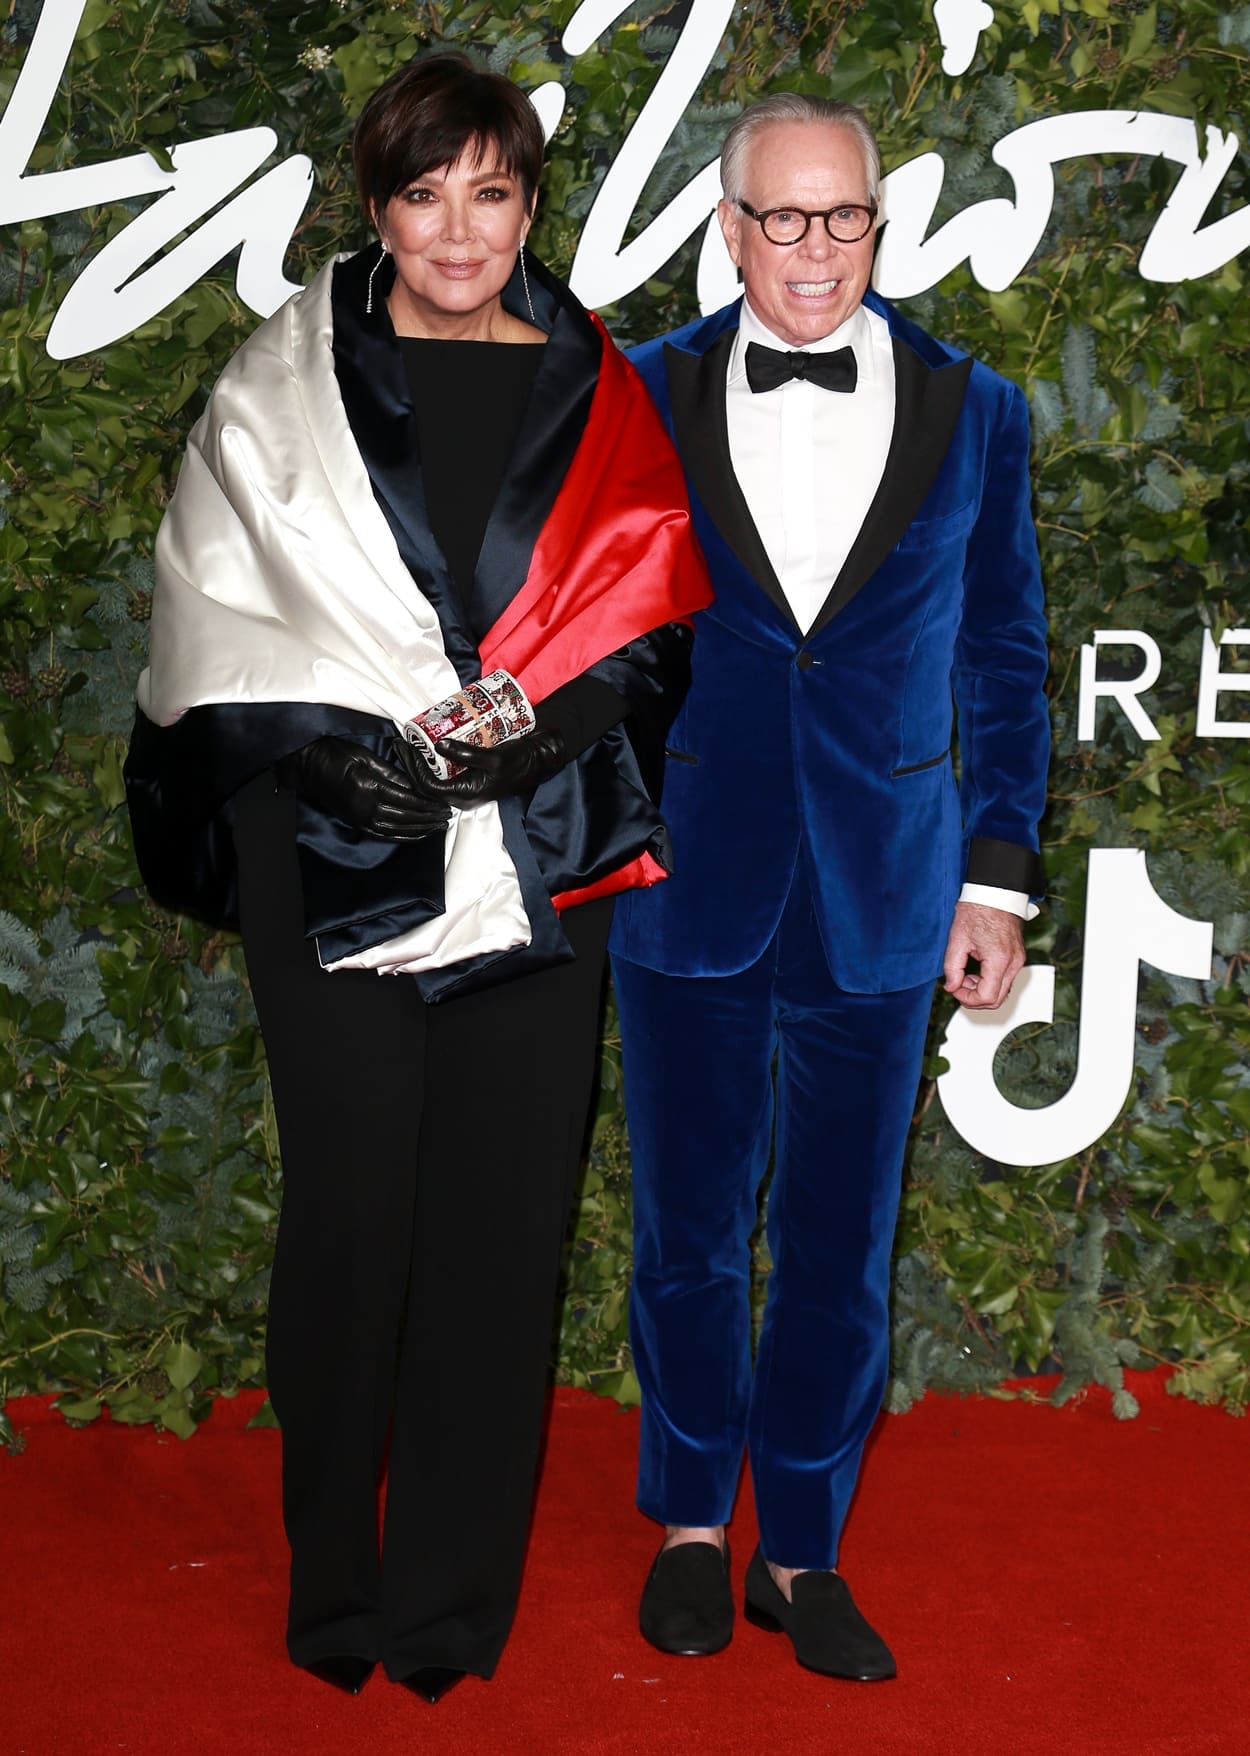 Kris Jenner and Tommy Hilfiger arrive at The Fashion Awards 2021 at the Royal Albert Hall